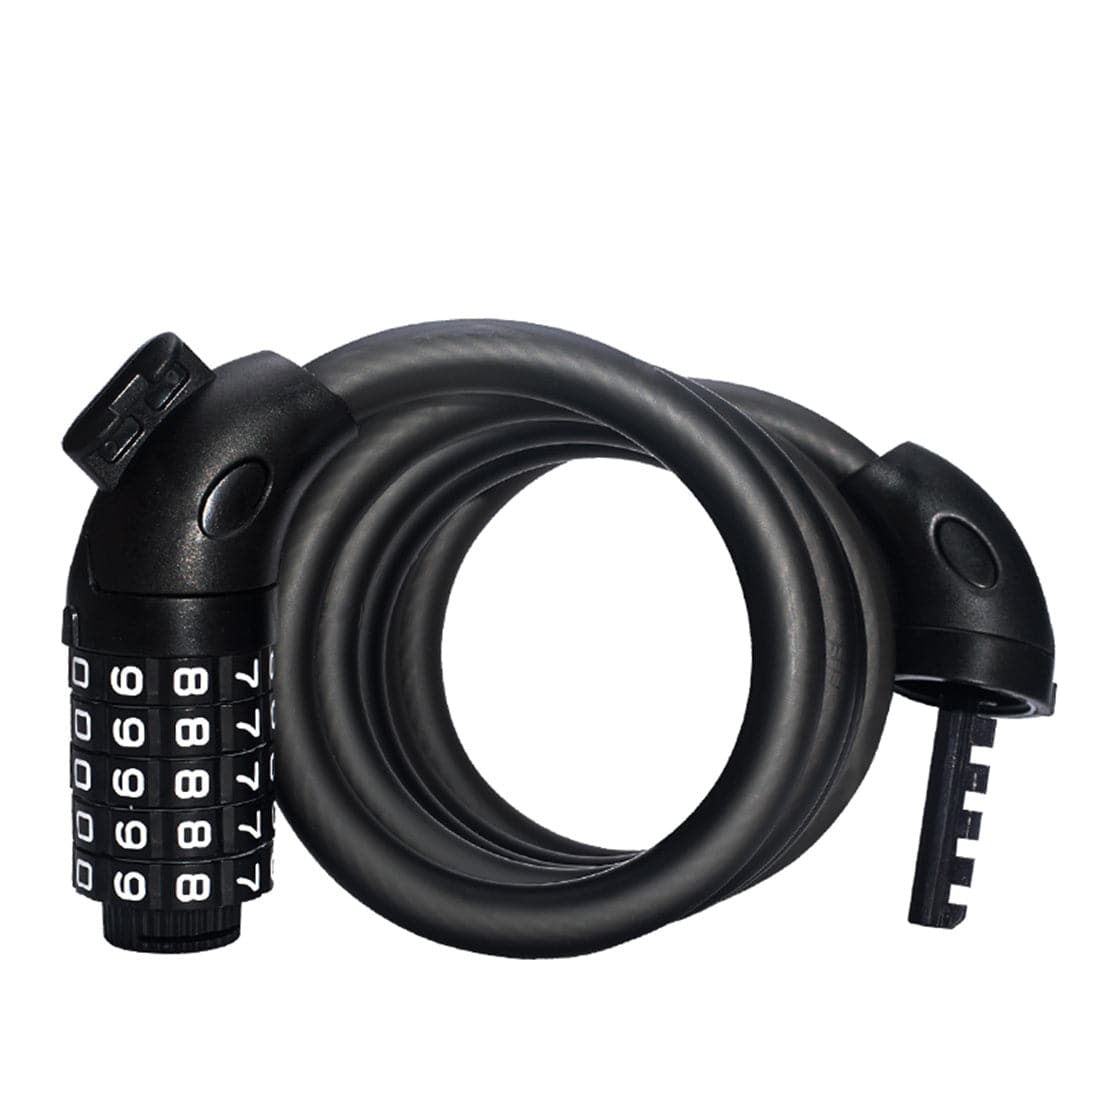 WTVA Bicycle Cable Lock